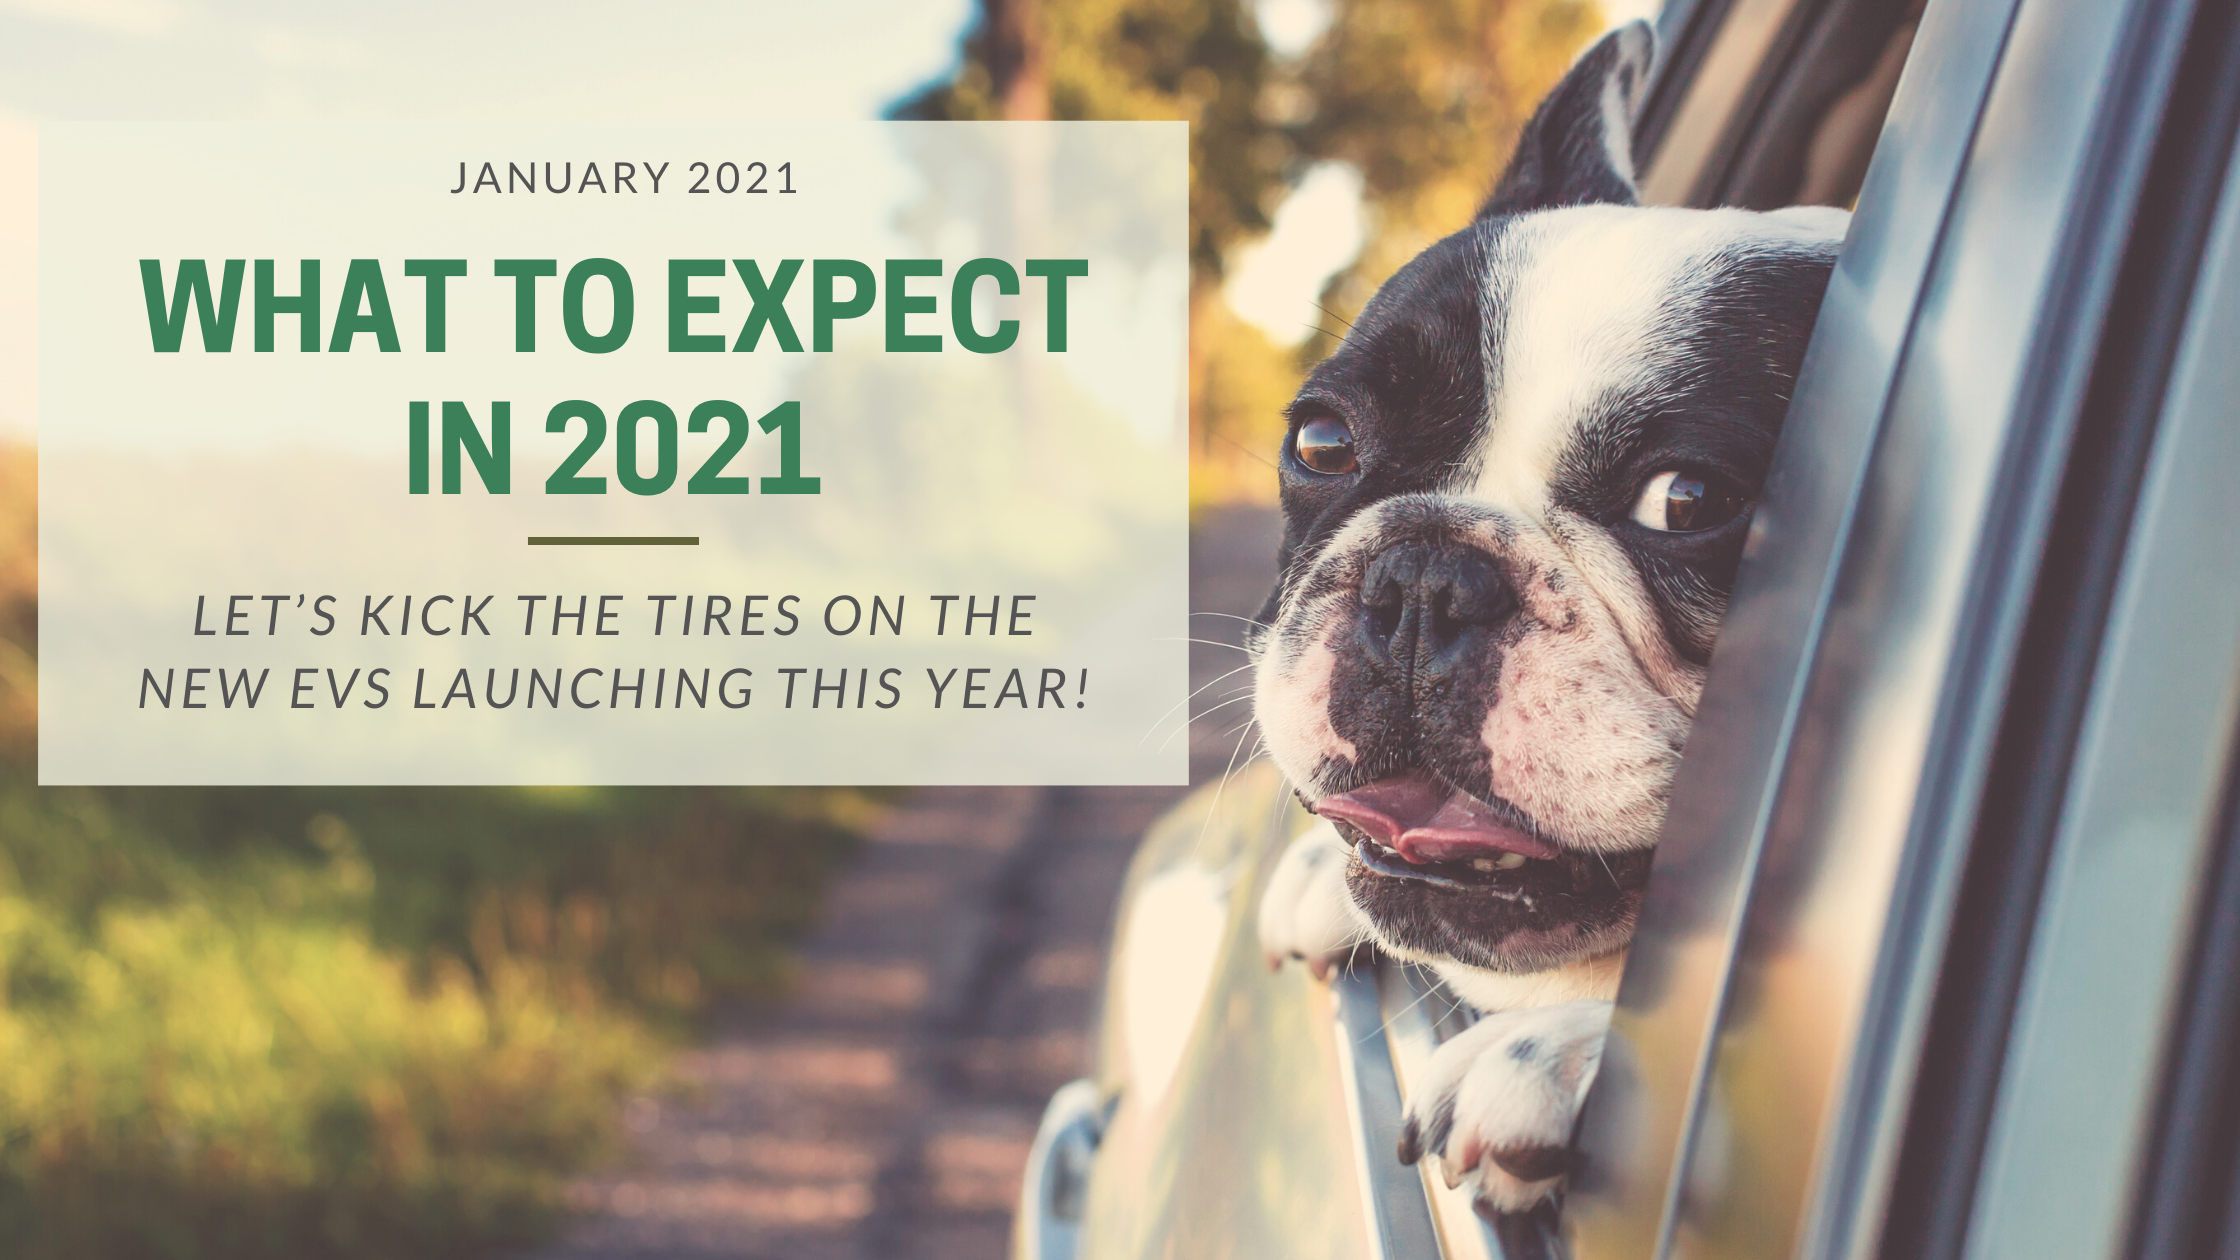 What to Expect In 2021: Let’s Kick the Tires on the New EVs Launching this Year!